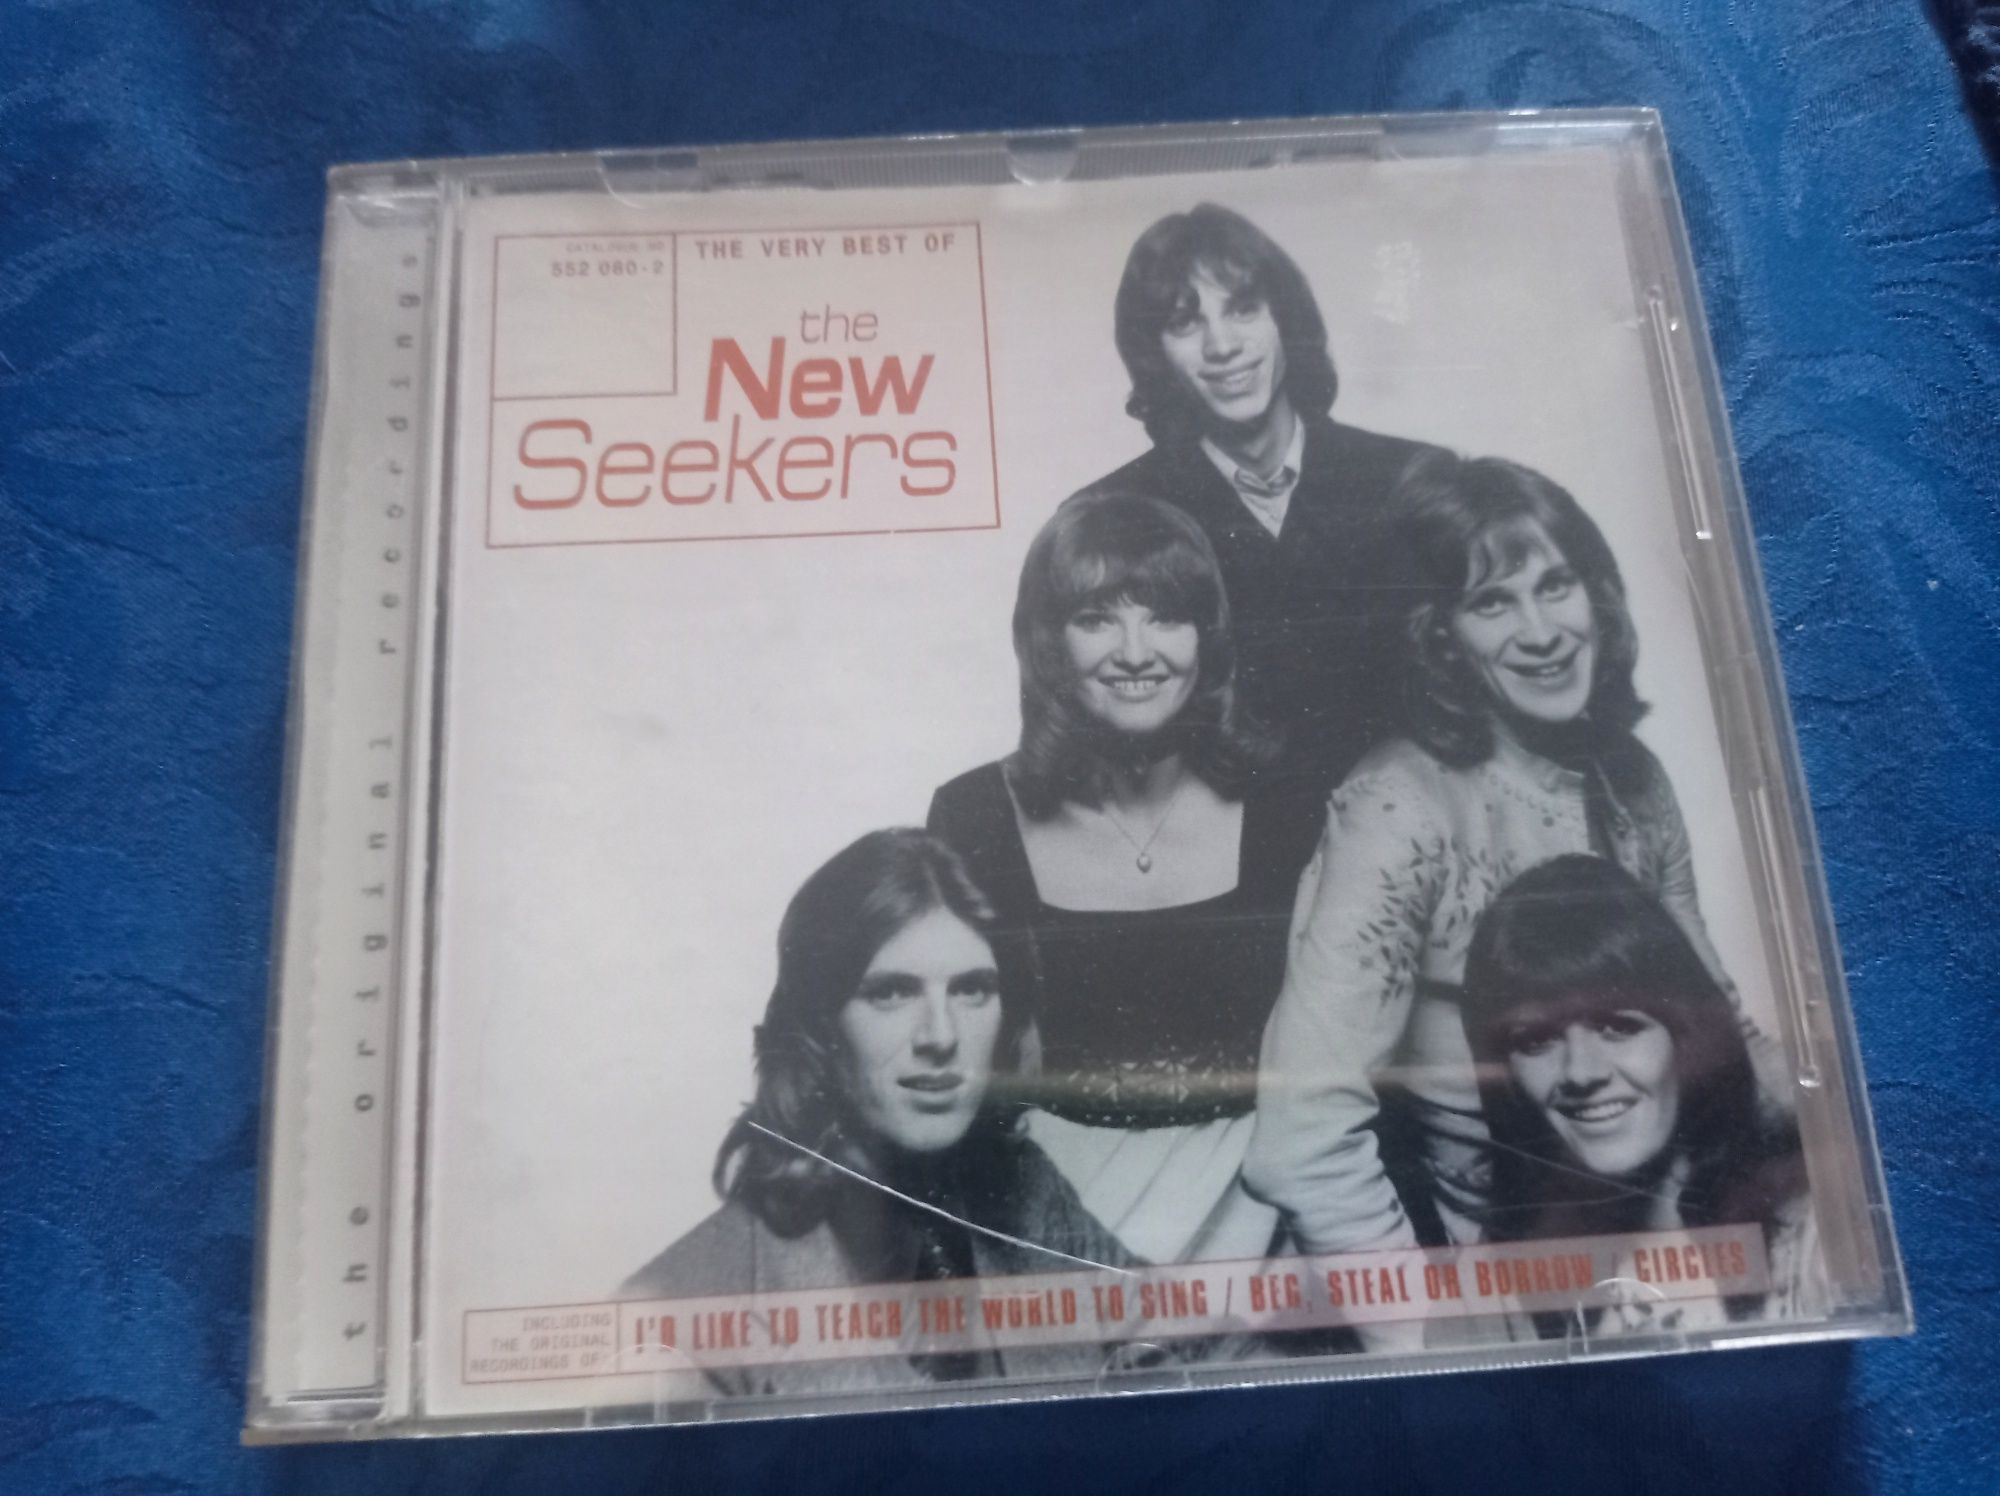 The New Seekers - The very best of